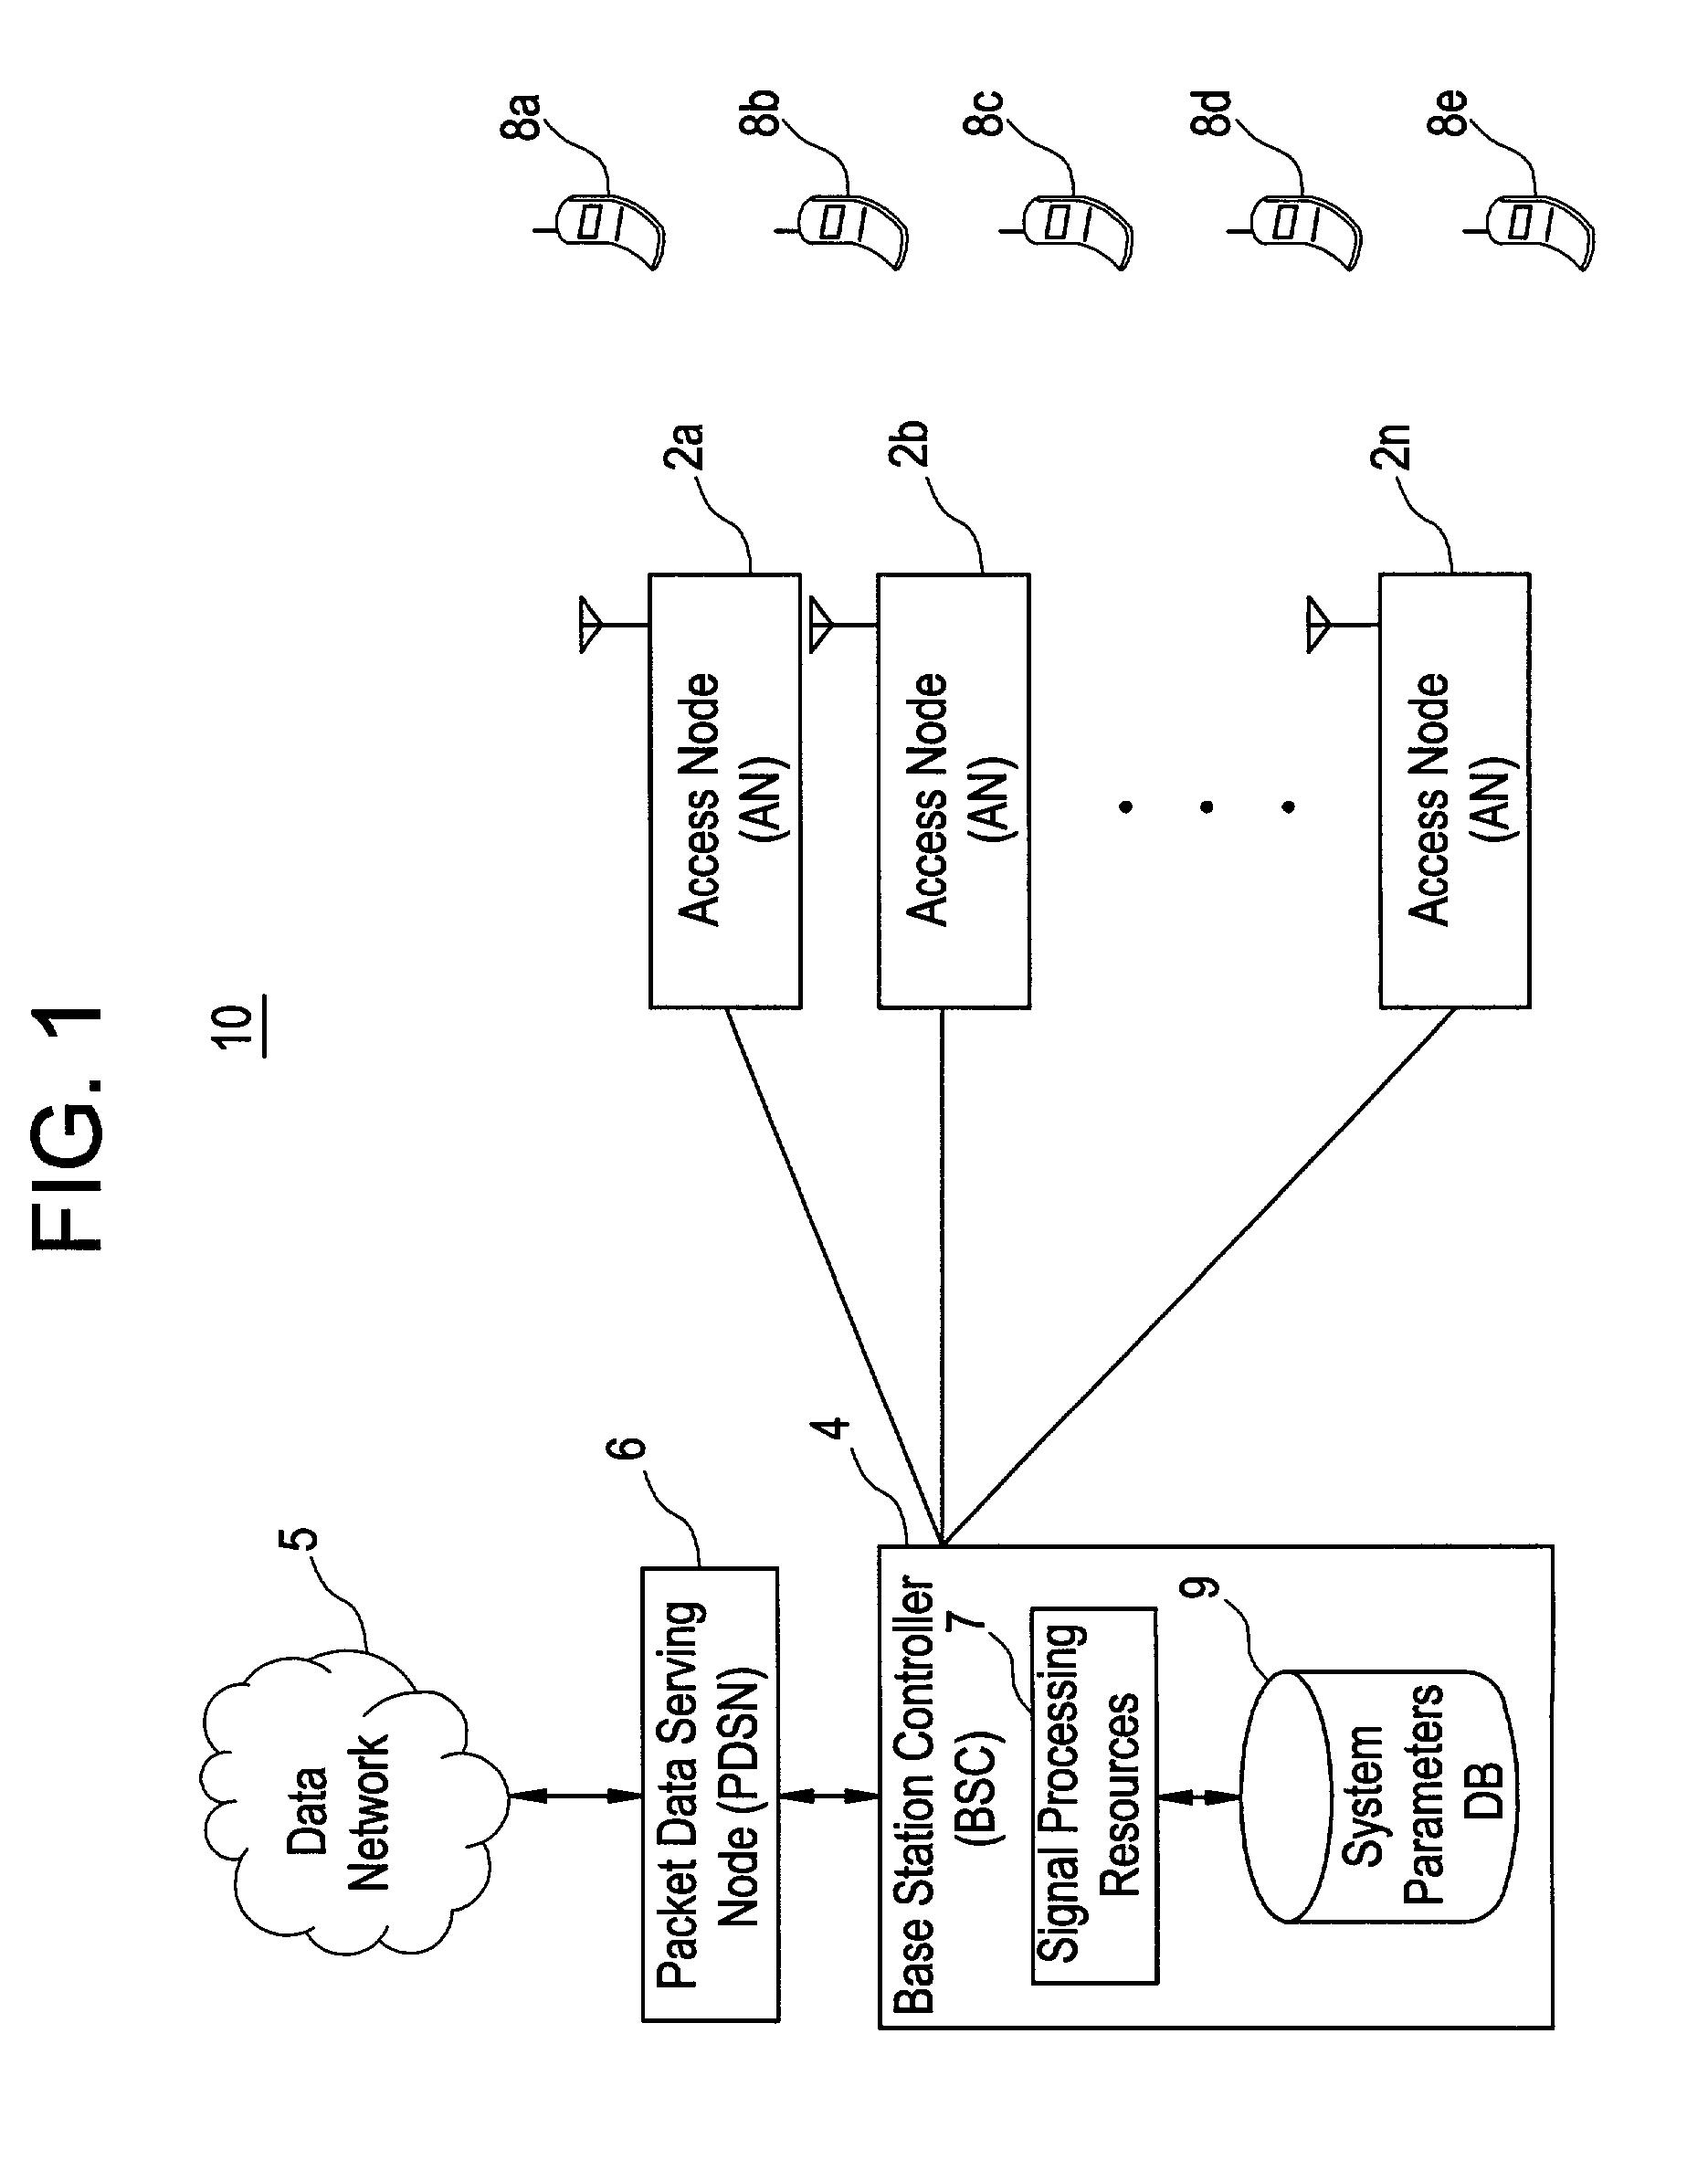 Adaptive data rate control for mobile data transfer